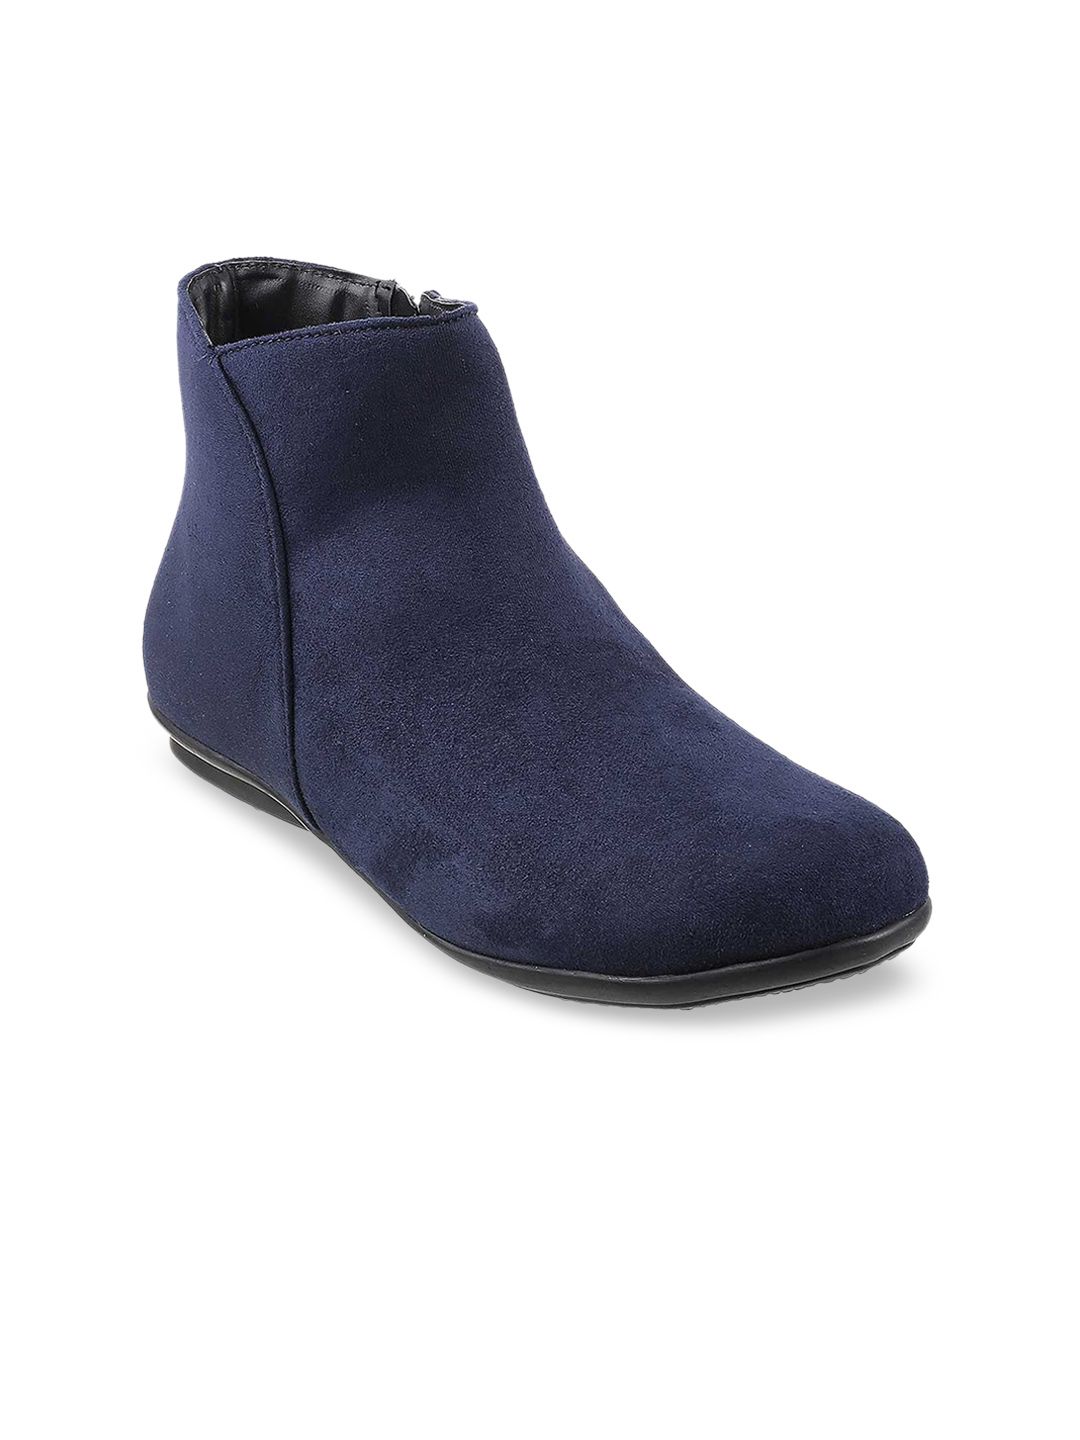 Mochi Women Blue Suede Flat Boots Price in India